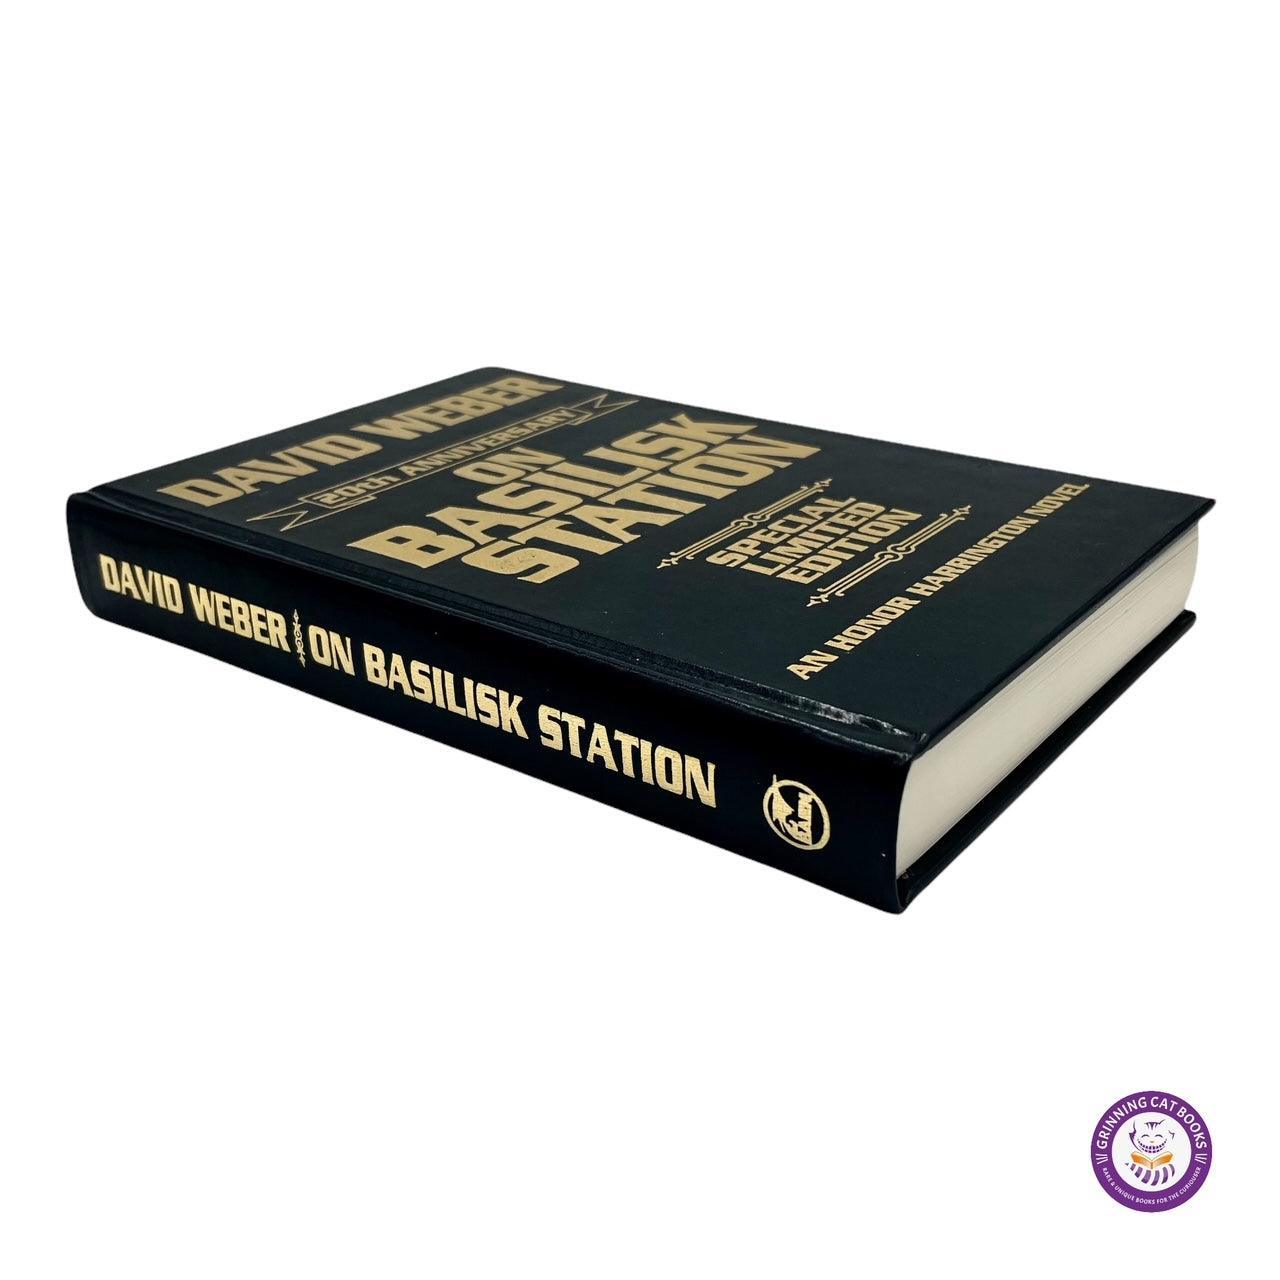 On Basilisk Station (Deluxe Edition, signed) - Grinning Cat Books - SCIENCE FICTION - SCIENCE FICTION, SIGNED